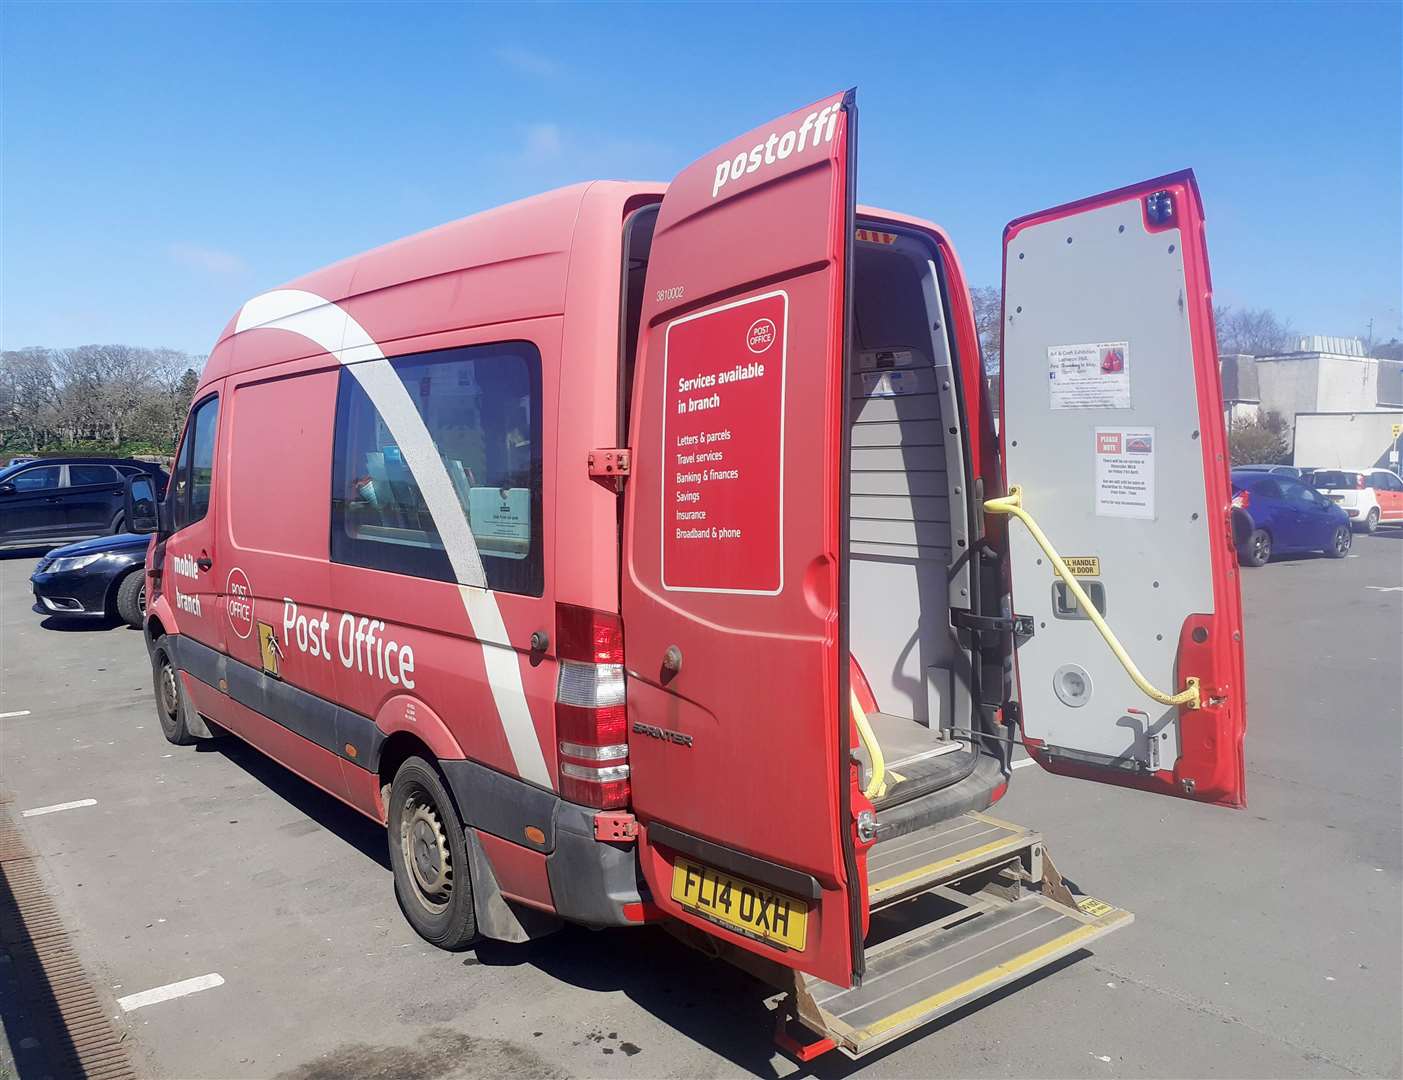 The mobile post office is at Wick's riverside car park three days a week.